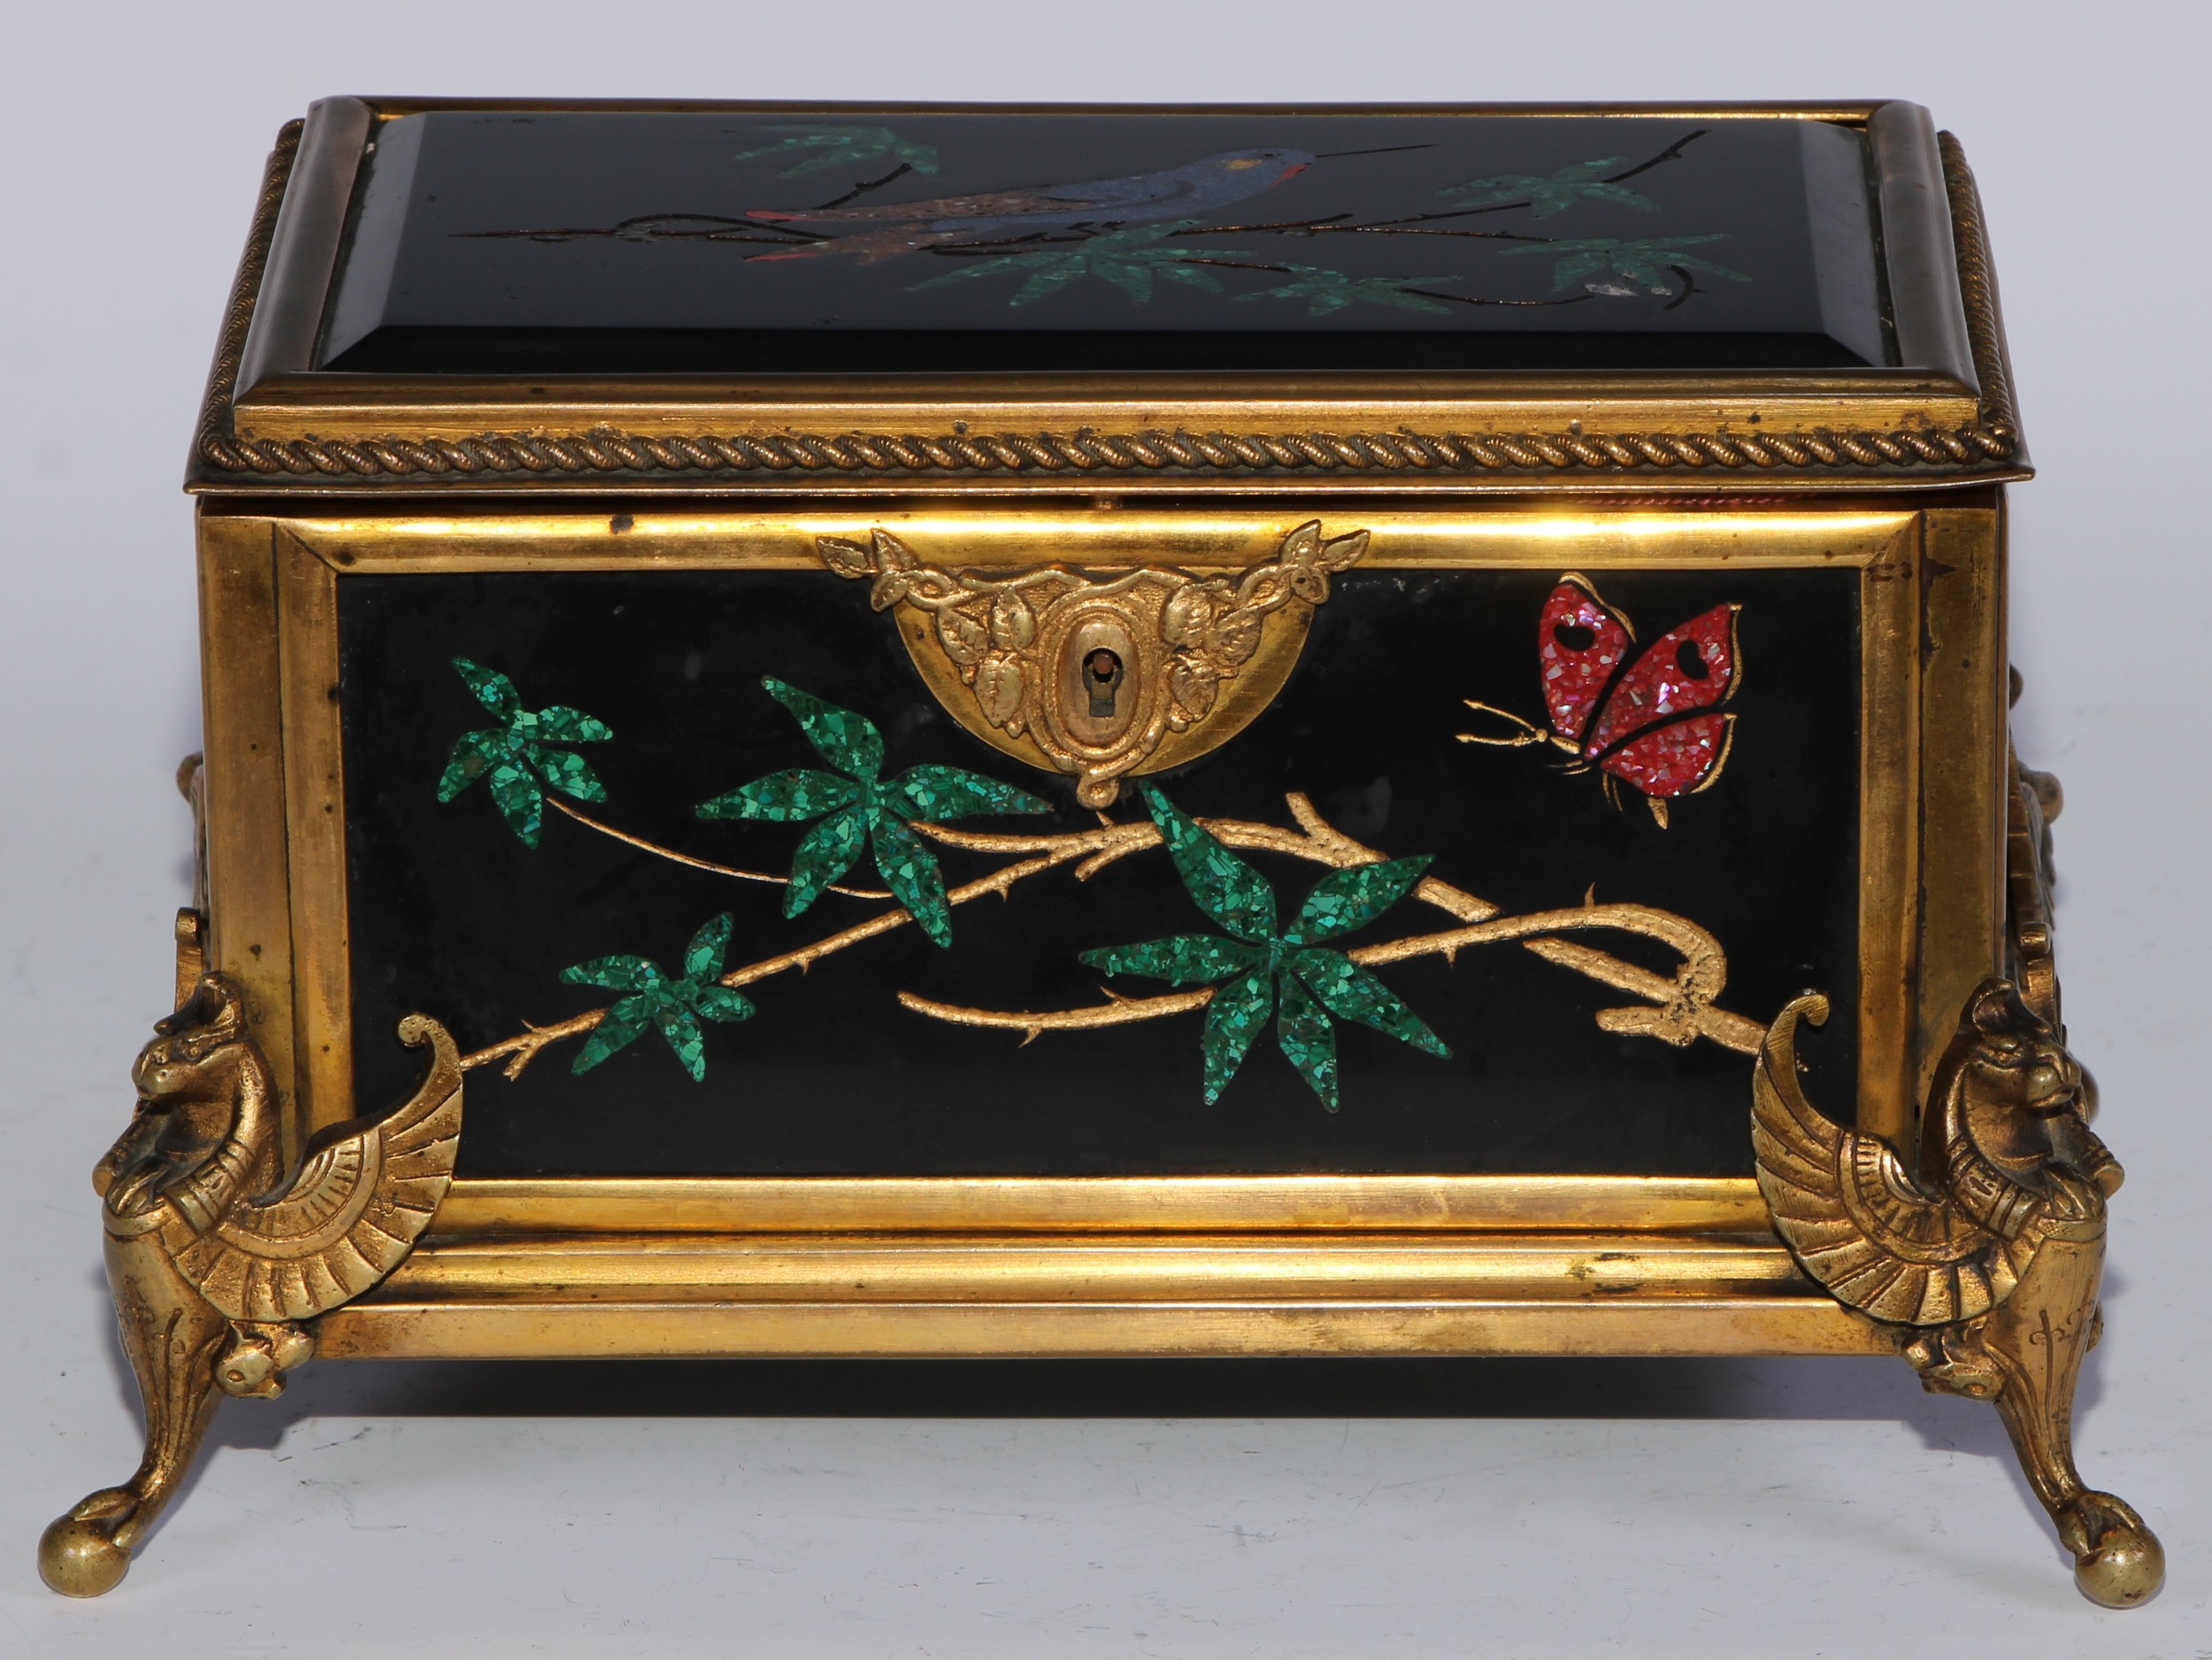 A 19th century ormolu and pietra dura casket, the top, front, sides and back each set with panels of